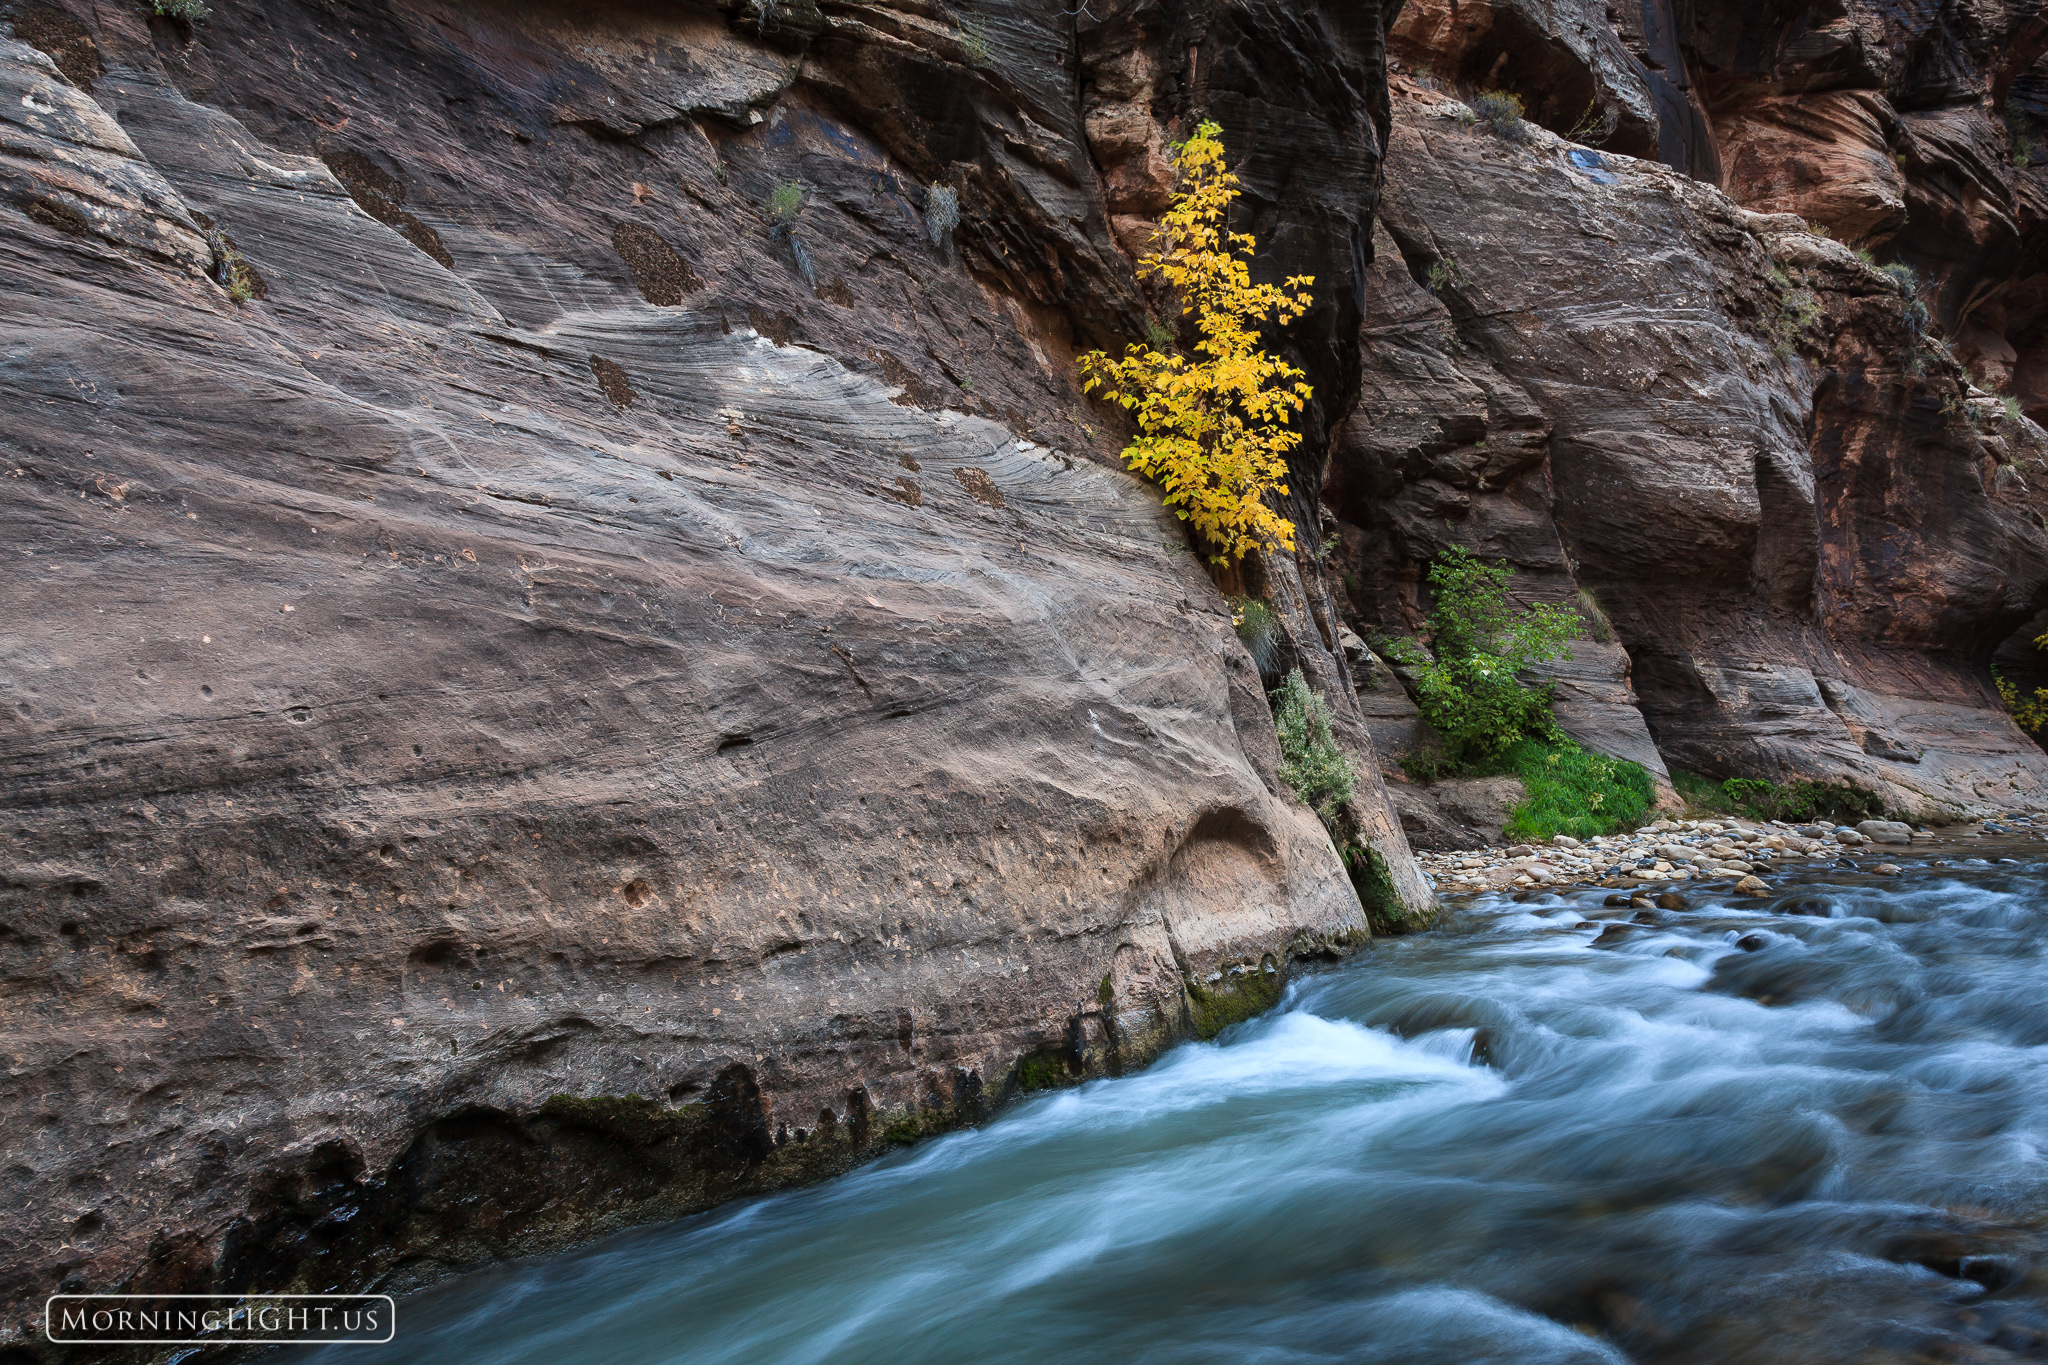 A tree finds life beside a rushing stream in Zion National Park.